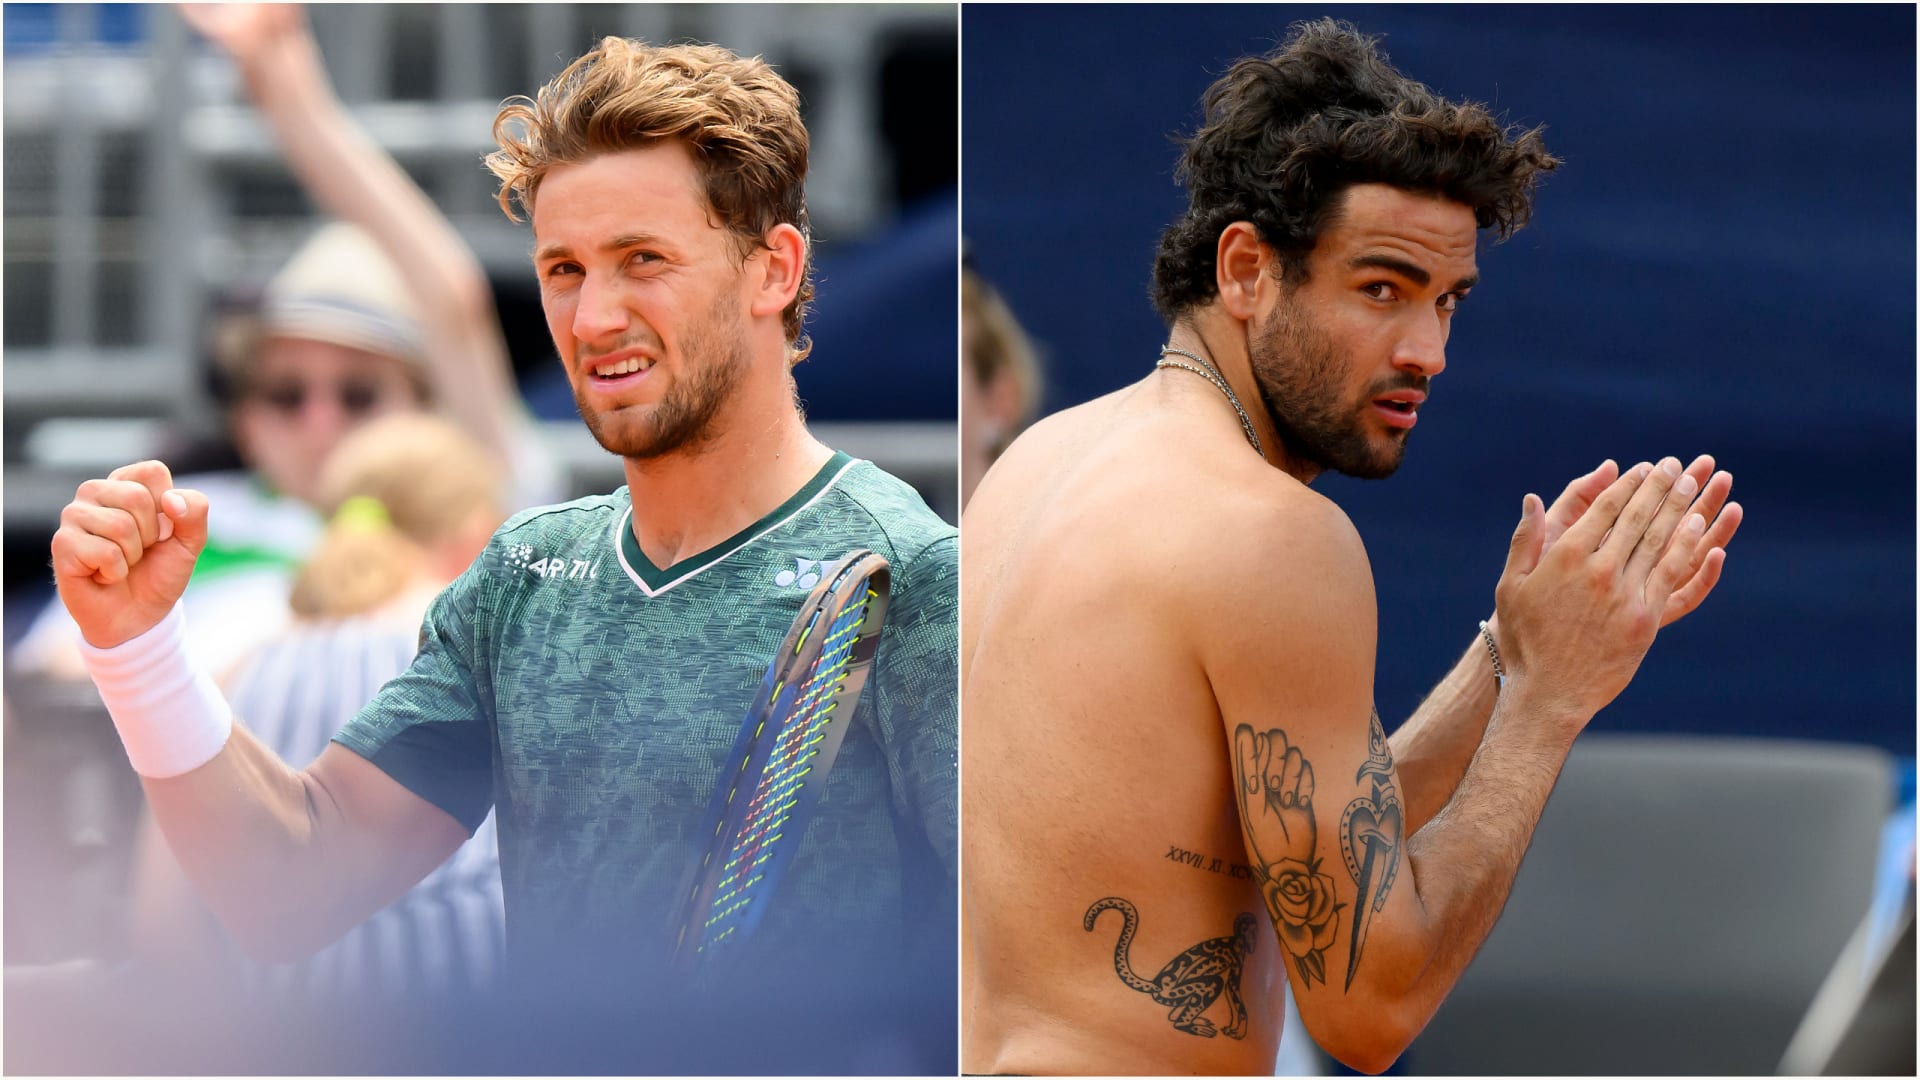 Former champions Casper Ruud and Matteo Berrettini to square off for Gstaad crown